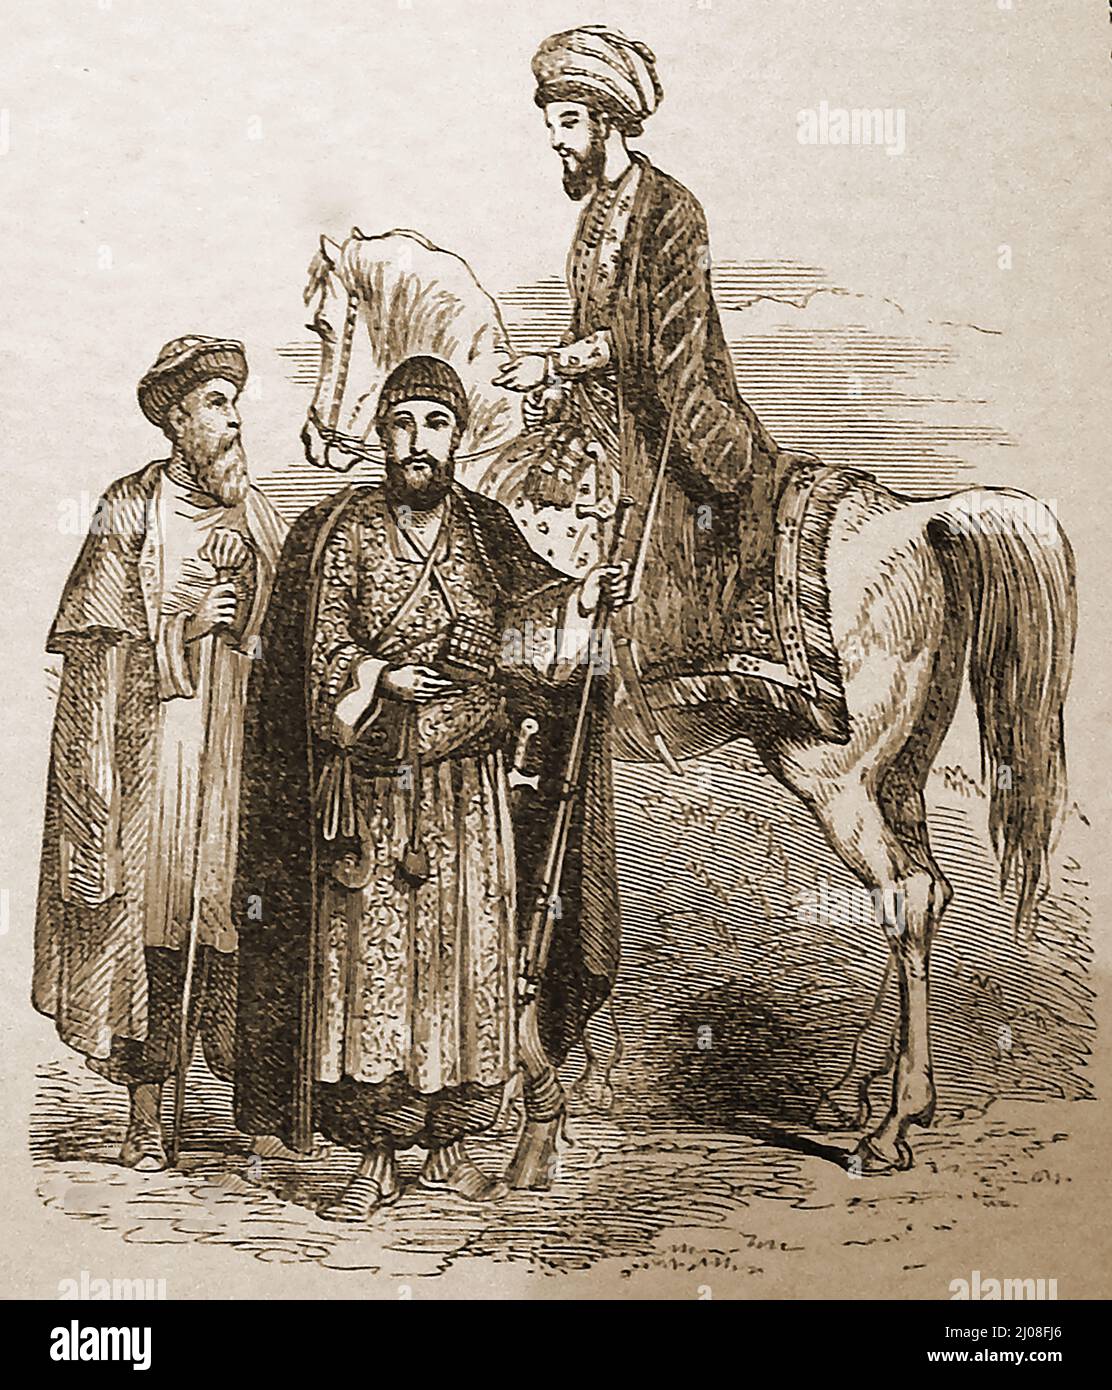 A 19th century illustration of Durani / Duranni ( formerly Abdālī )tribesmen from Afghanistan. Though widespread elsewhere, including in parts of Pakistan, their main home is in the Kandahar region. They are one of the largest Pashtun tribes, Stock Photo